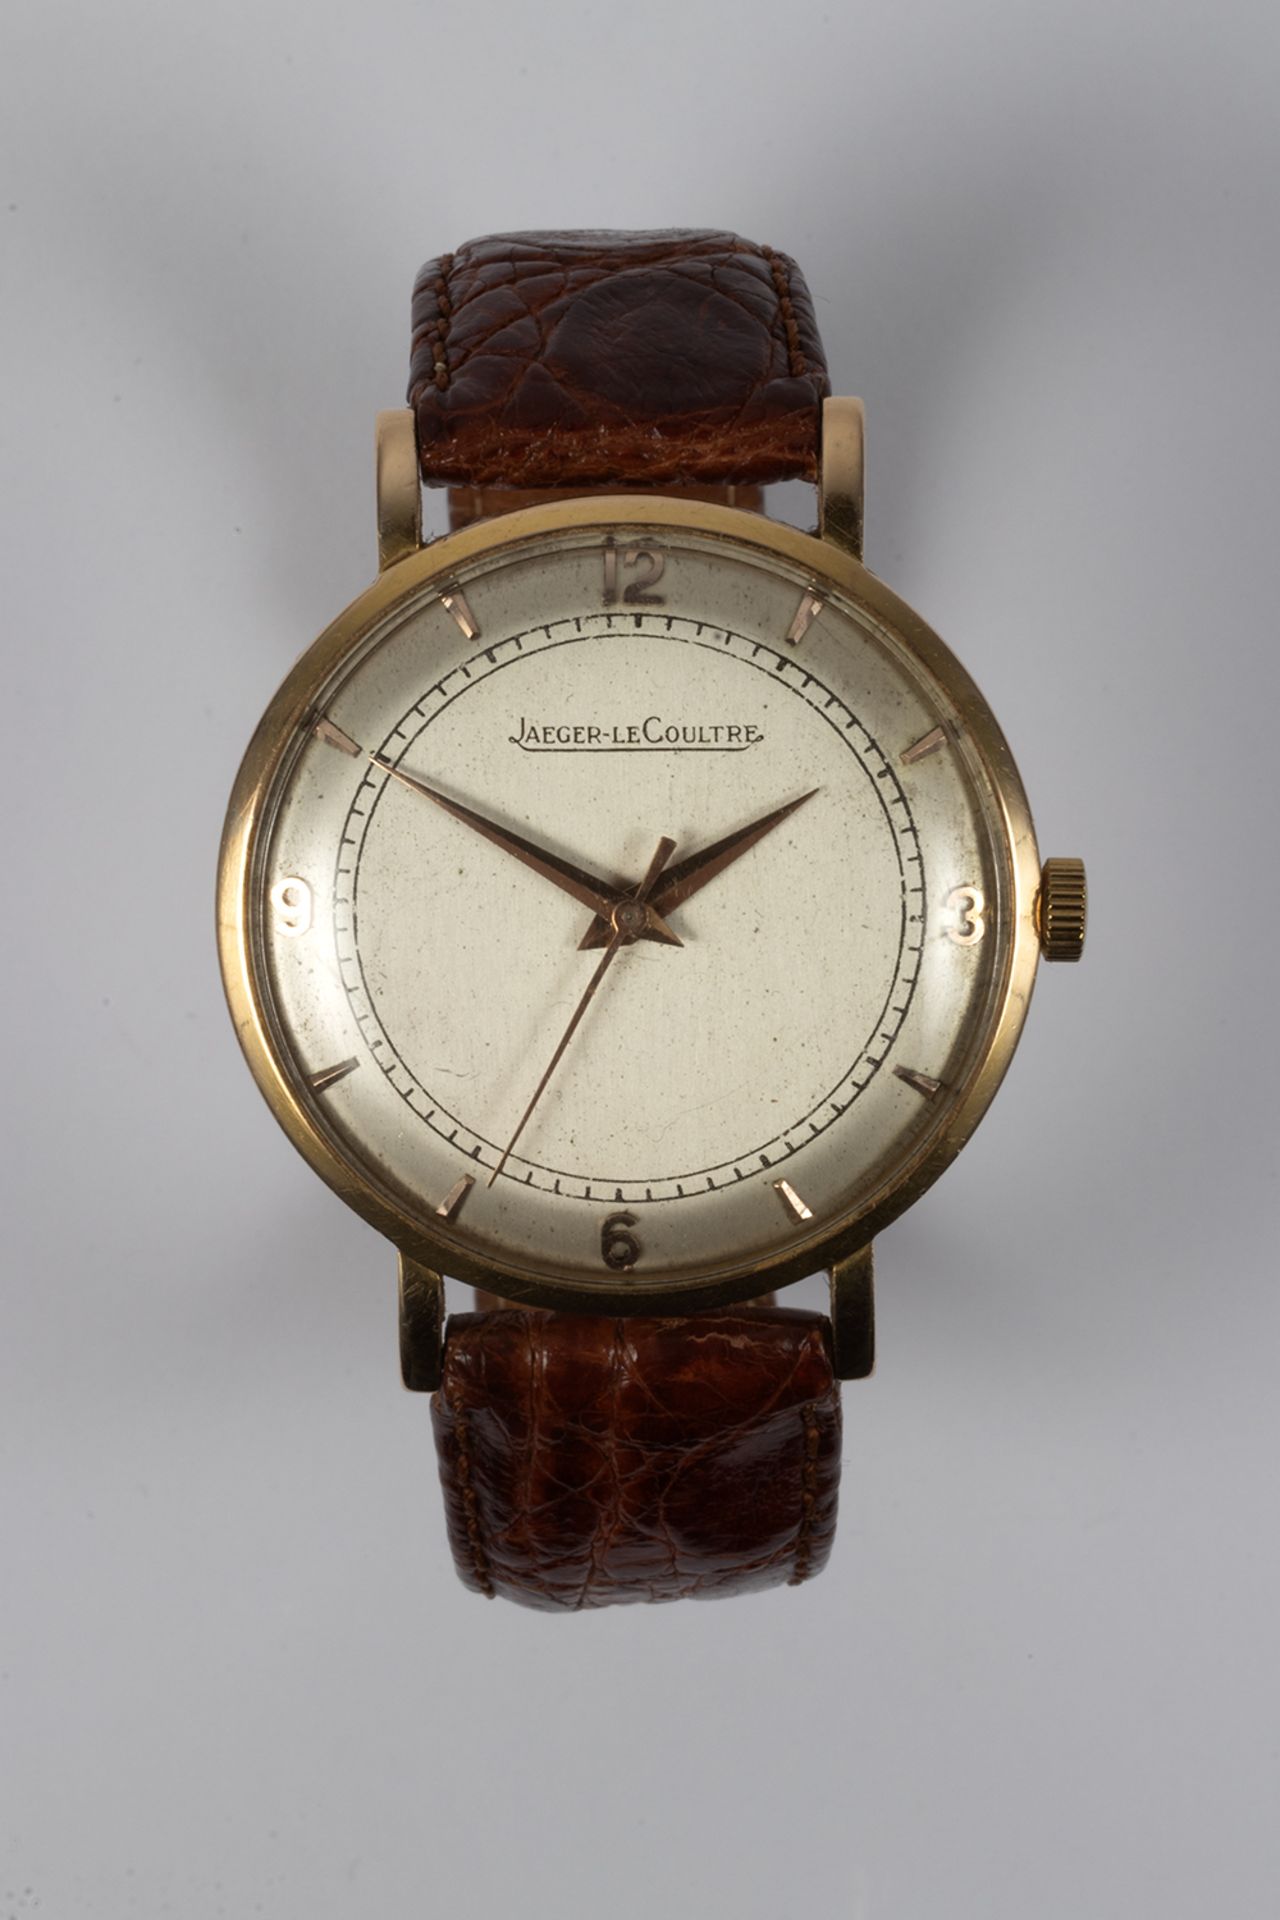 Jaeger-LeCoultre men's wristwatch. In gold and non-original leather strap